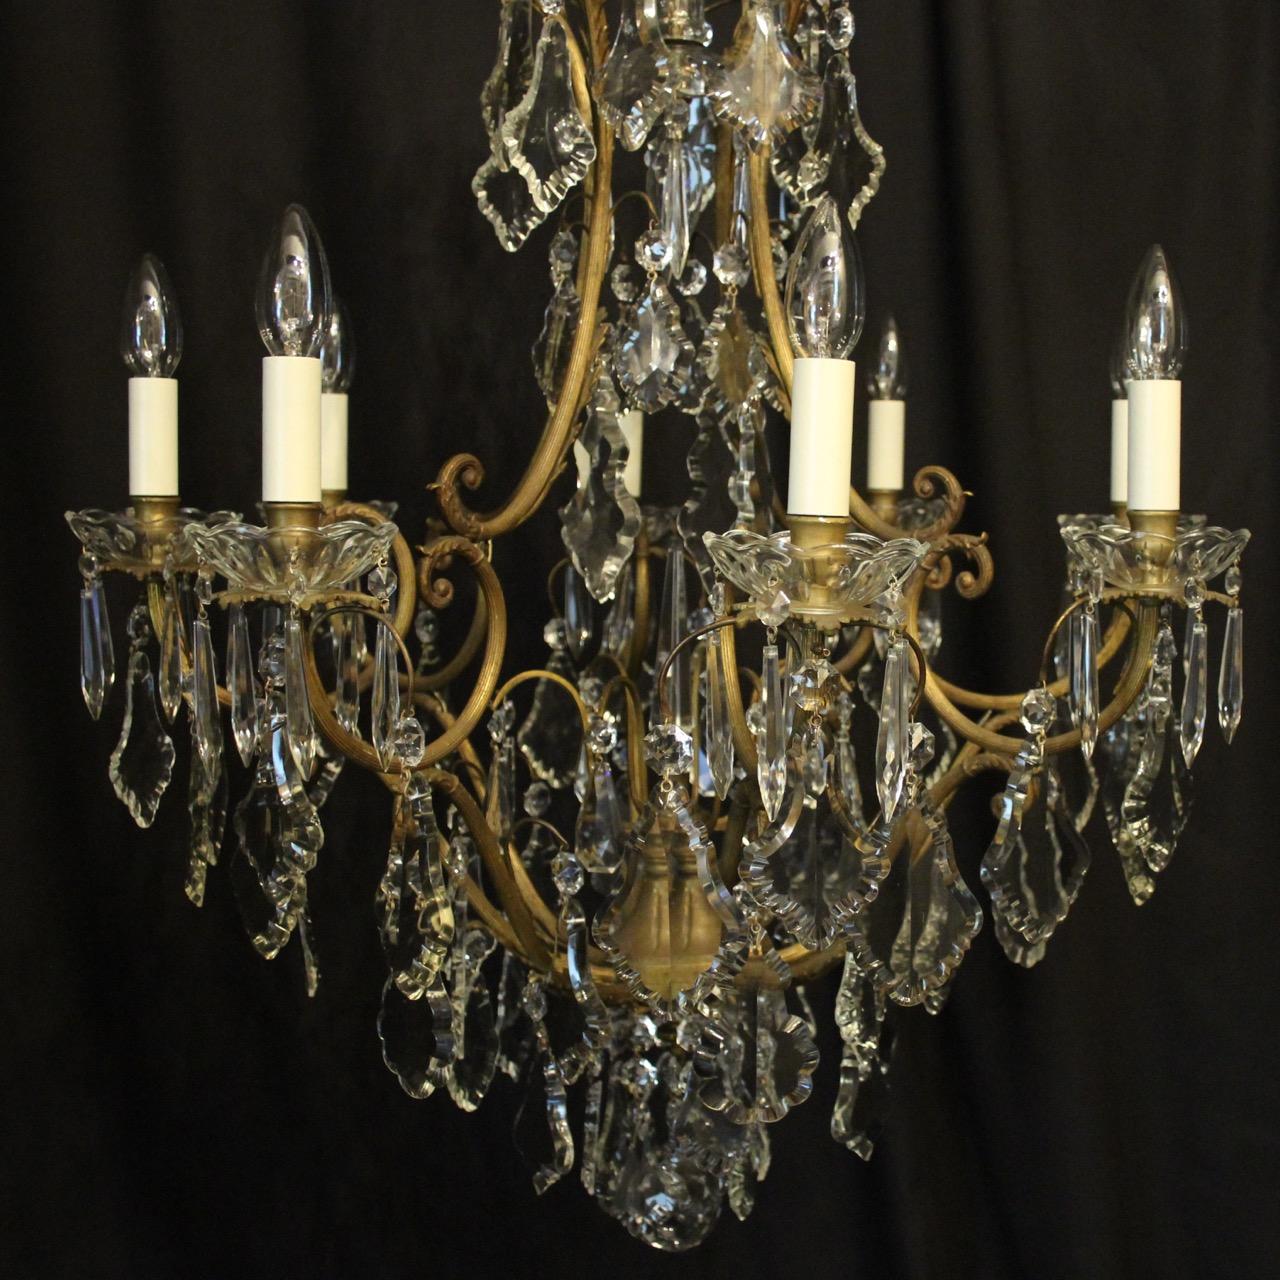 A French gilded cast brass and crystal 9-light birdcage form antique chandelier, the 8 reeded scrolling arms with glass bobeche drip pans and bulbous candle sconces, issuing from an foliated cage form interior with a single inverted light fitting